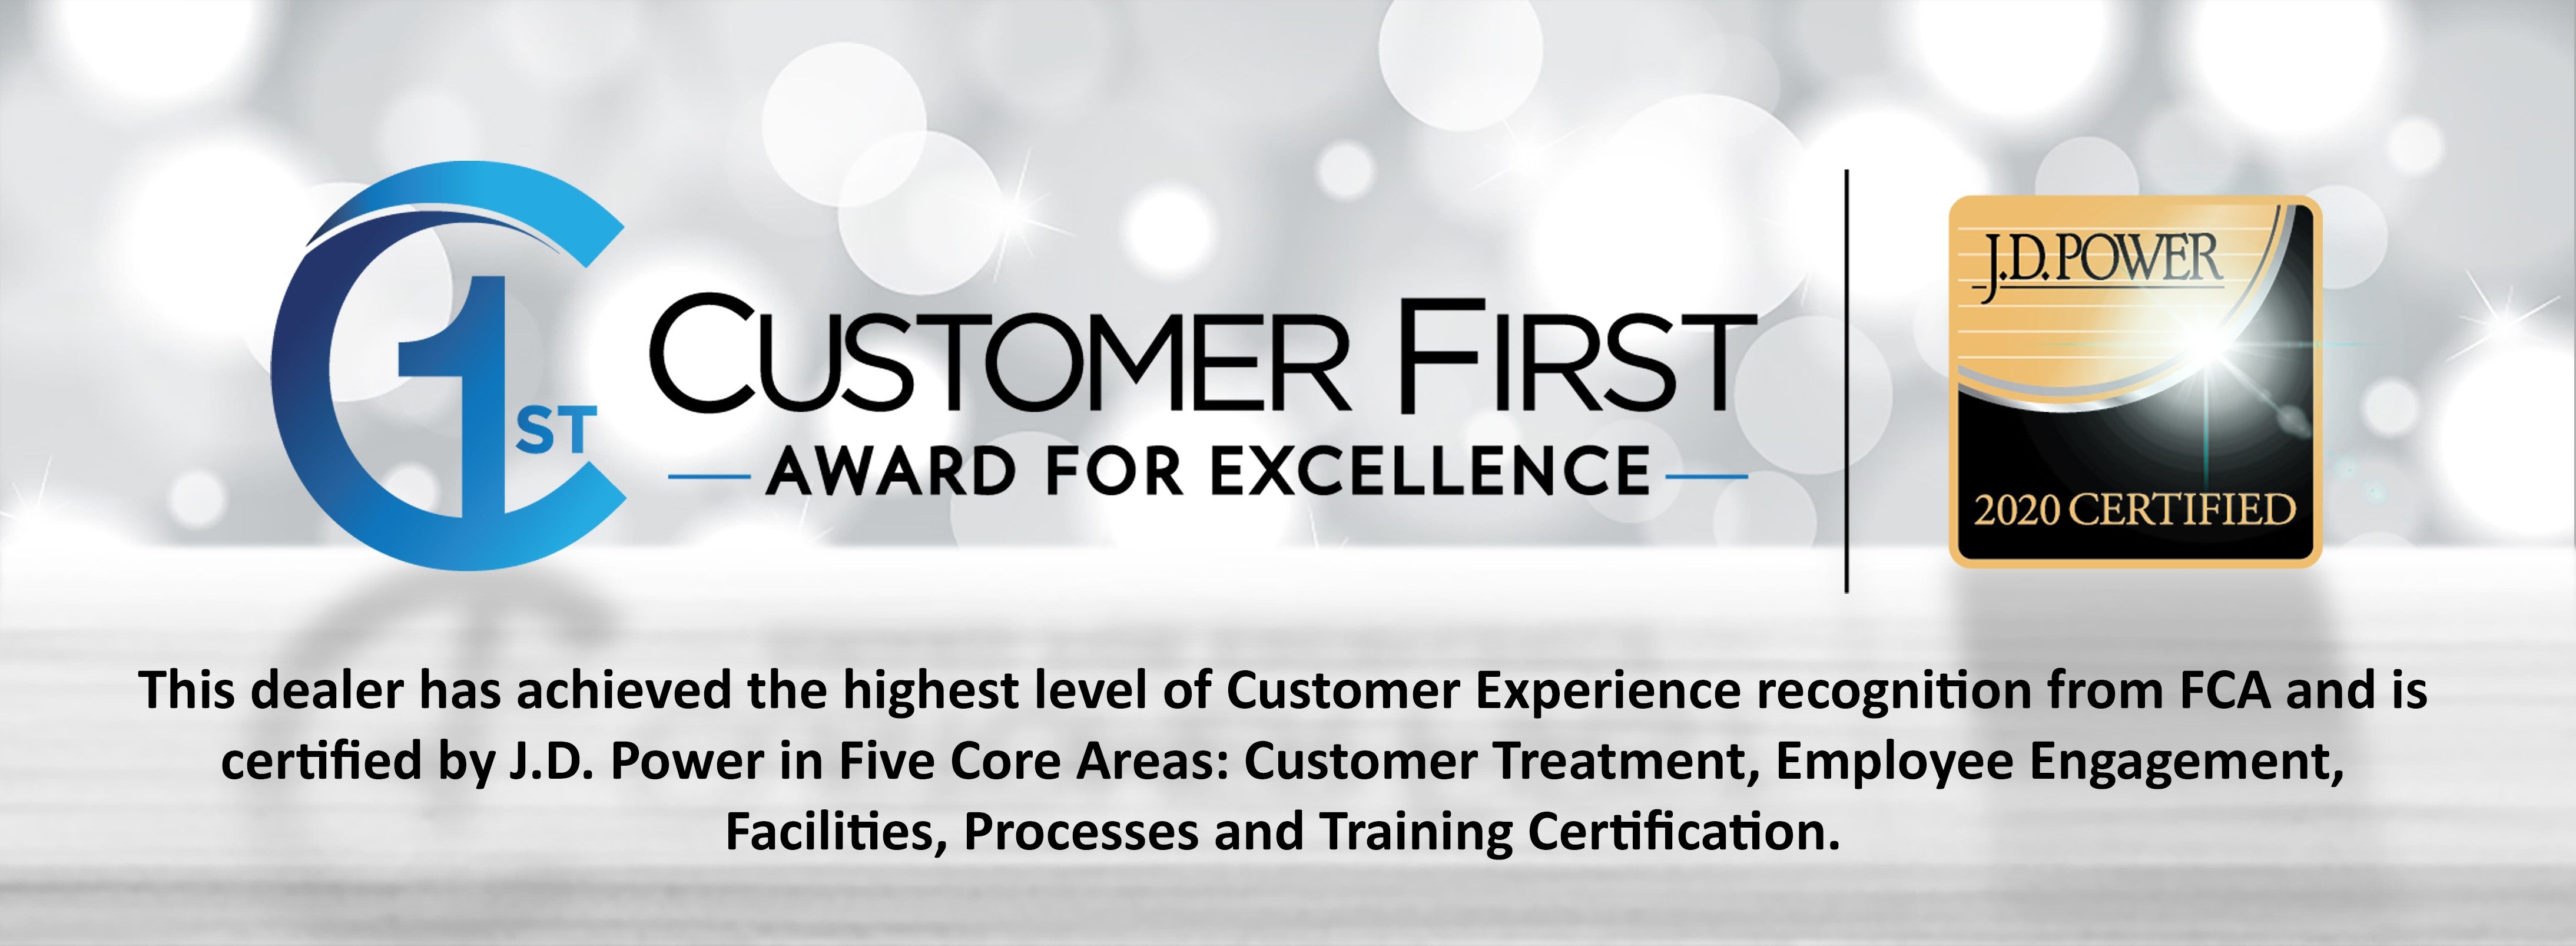 Customer First Award for Excellence for 2019 at Homan Chrysler Dodge Jeep Ram of Ripon in Ripon, WI